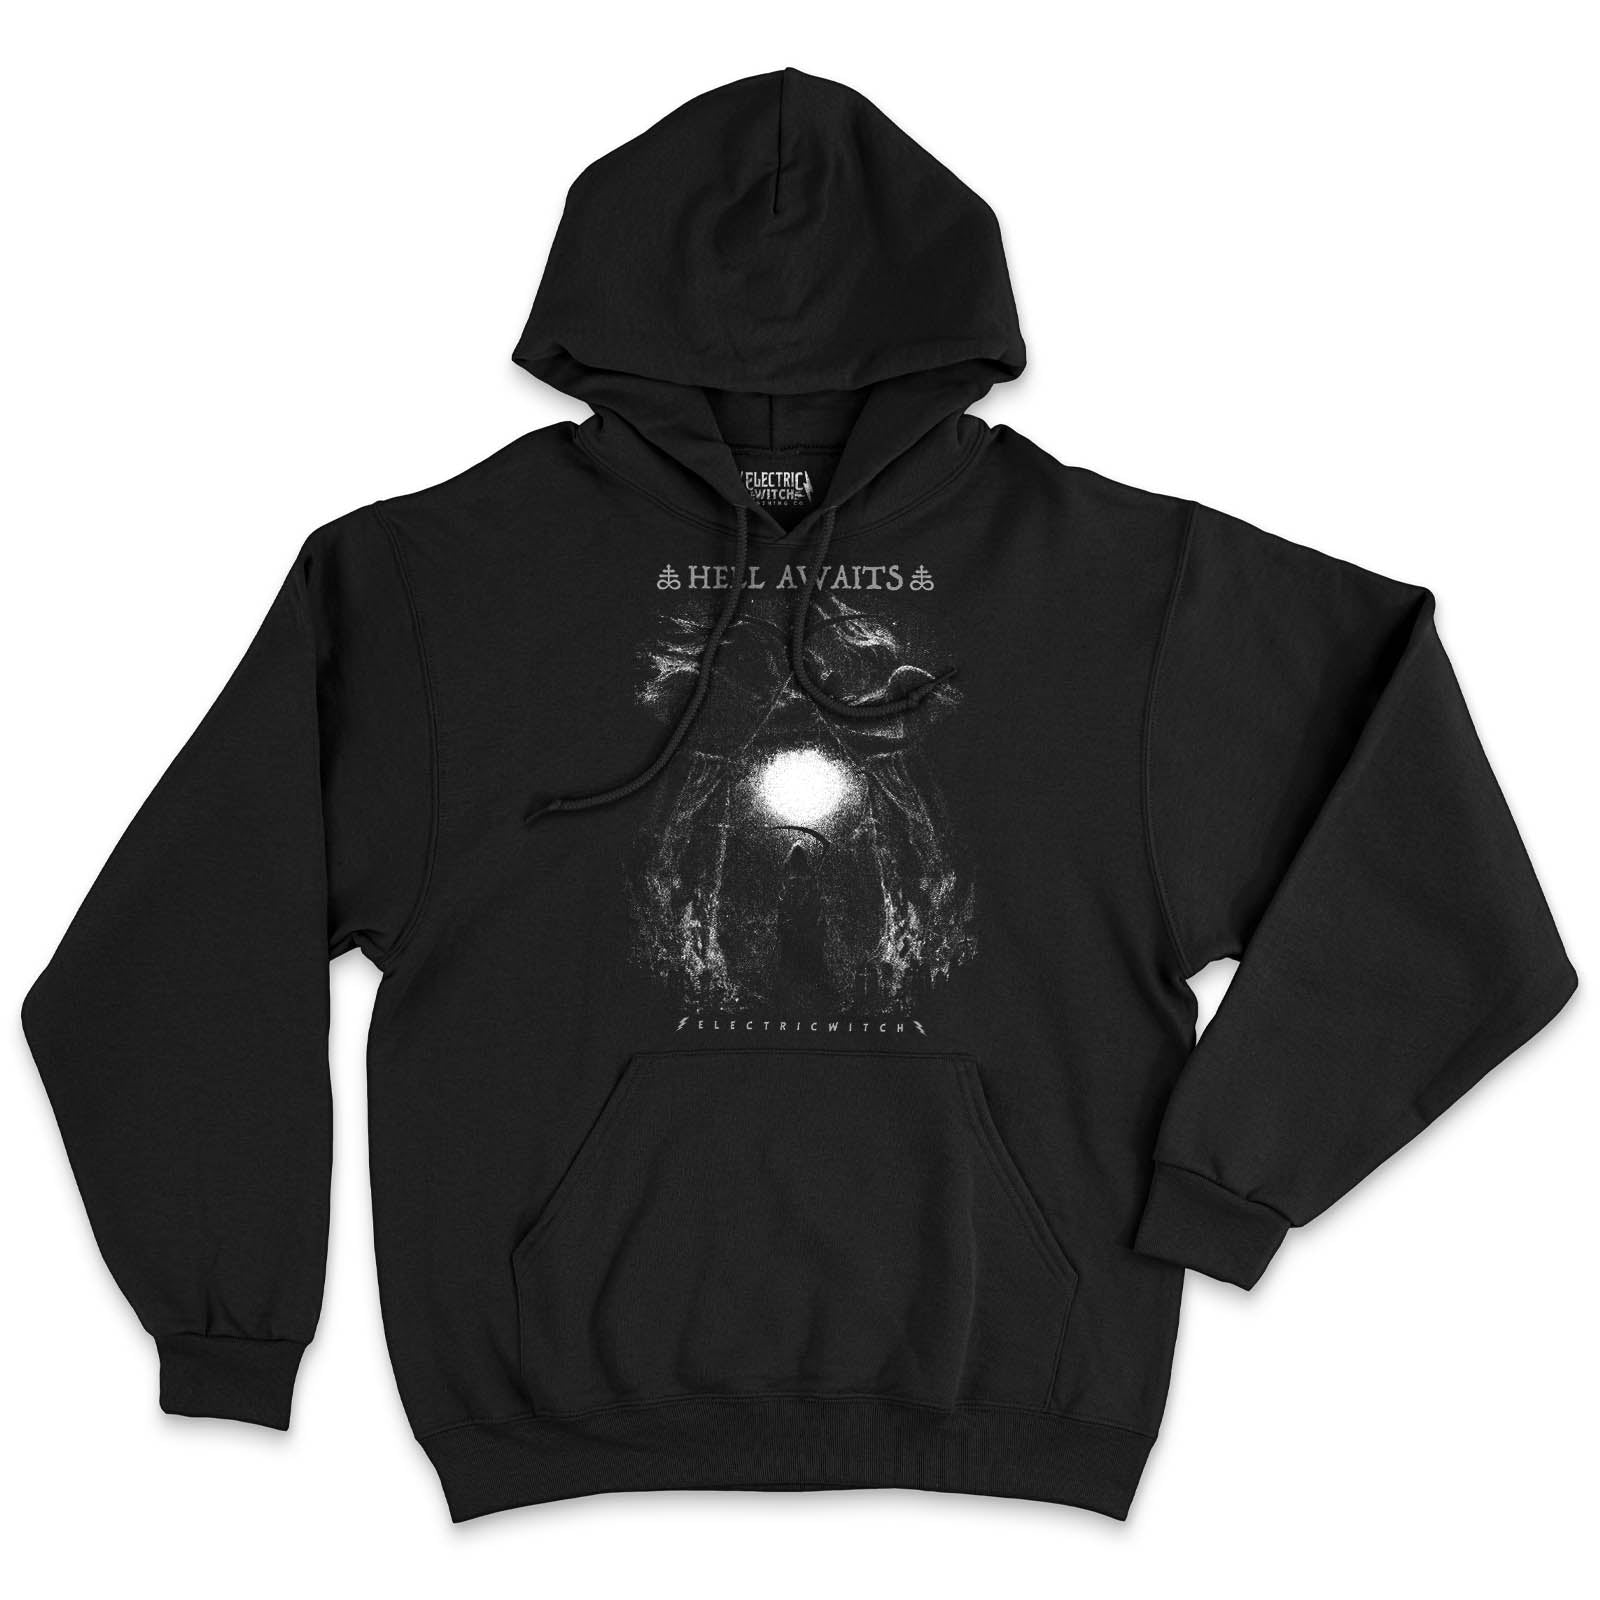 Hell Awaits Pullover Hoodie